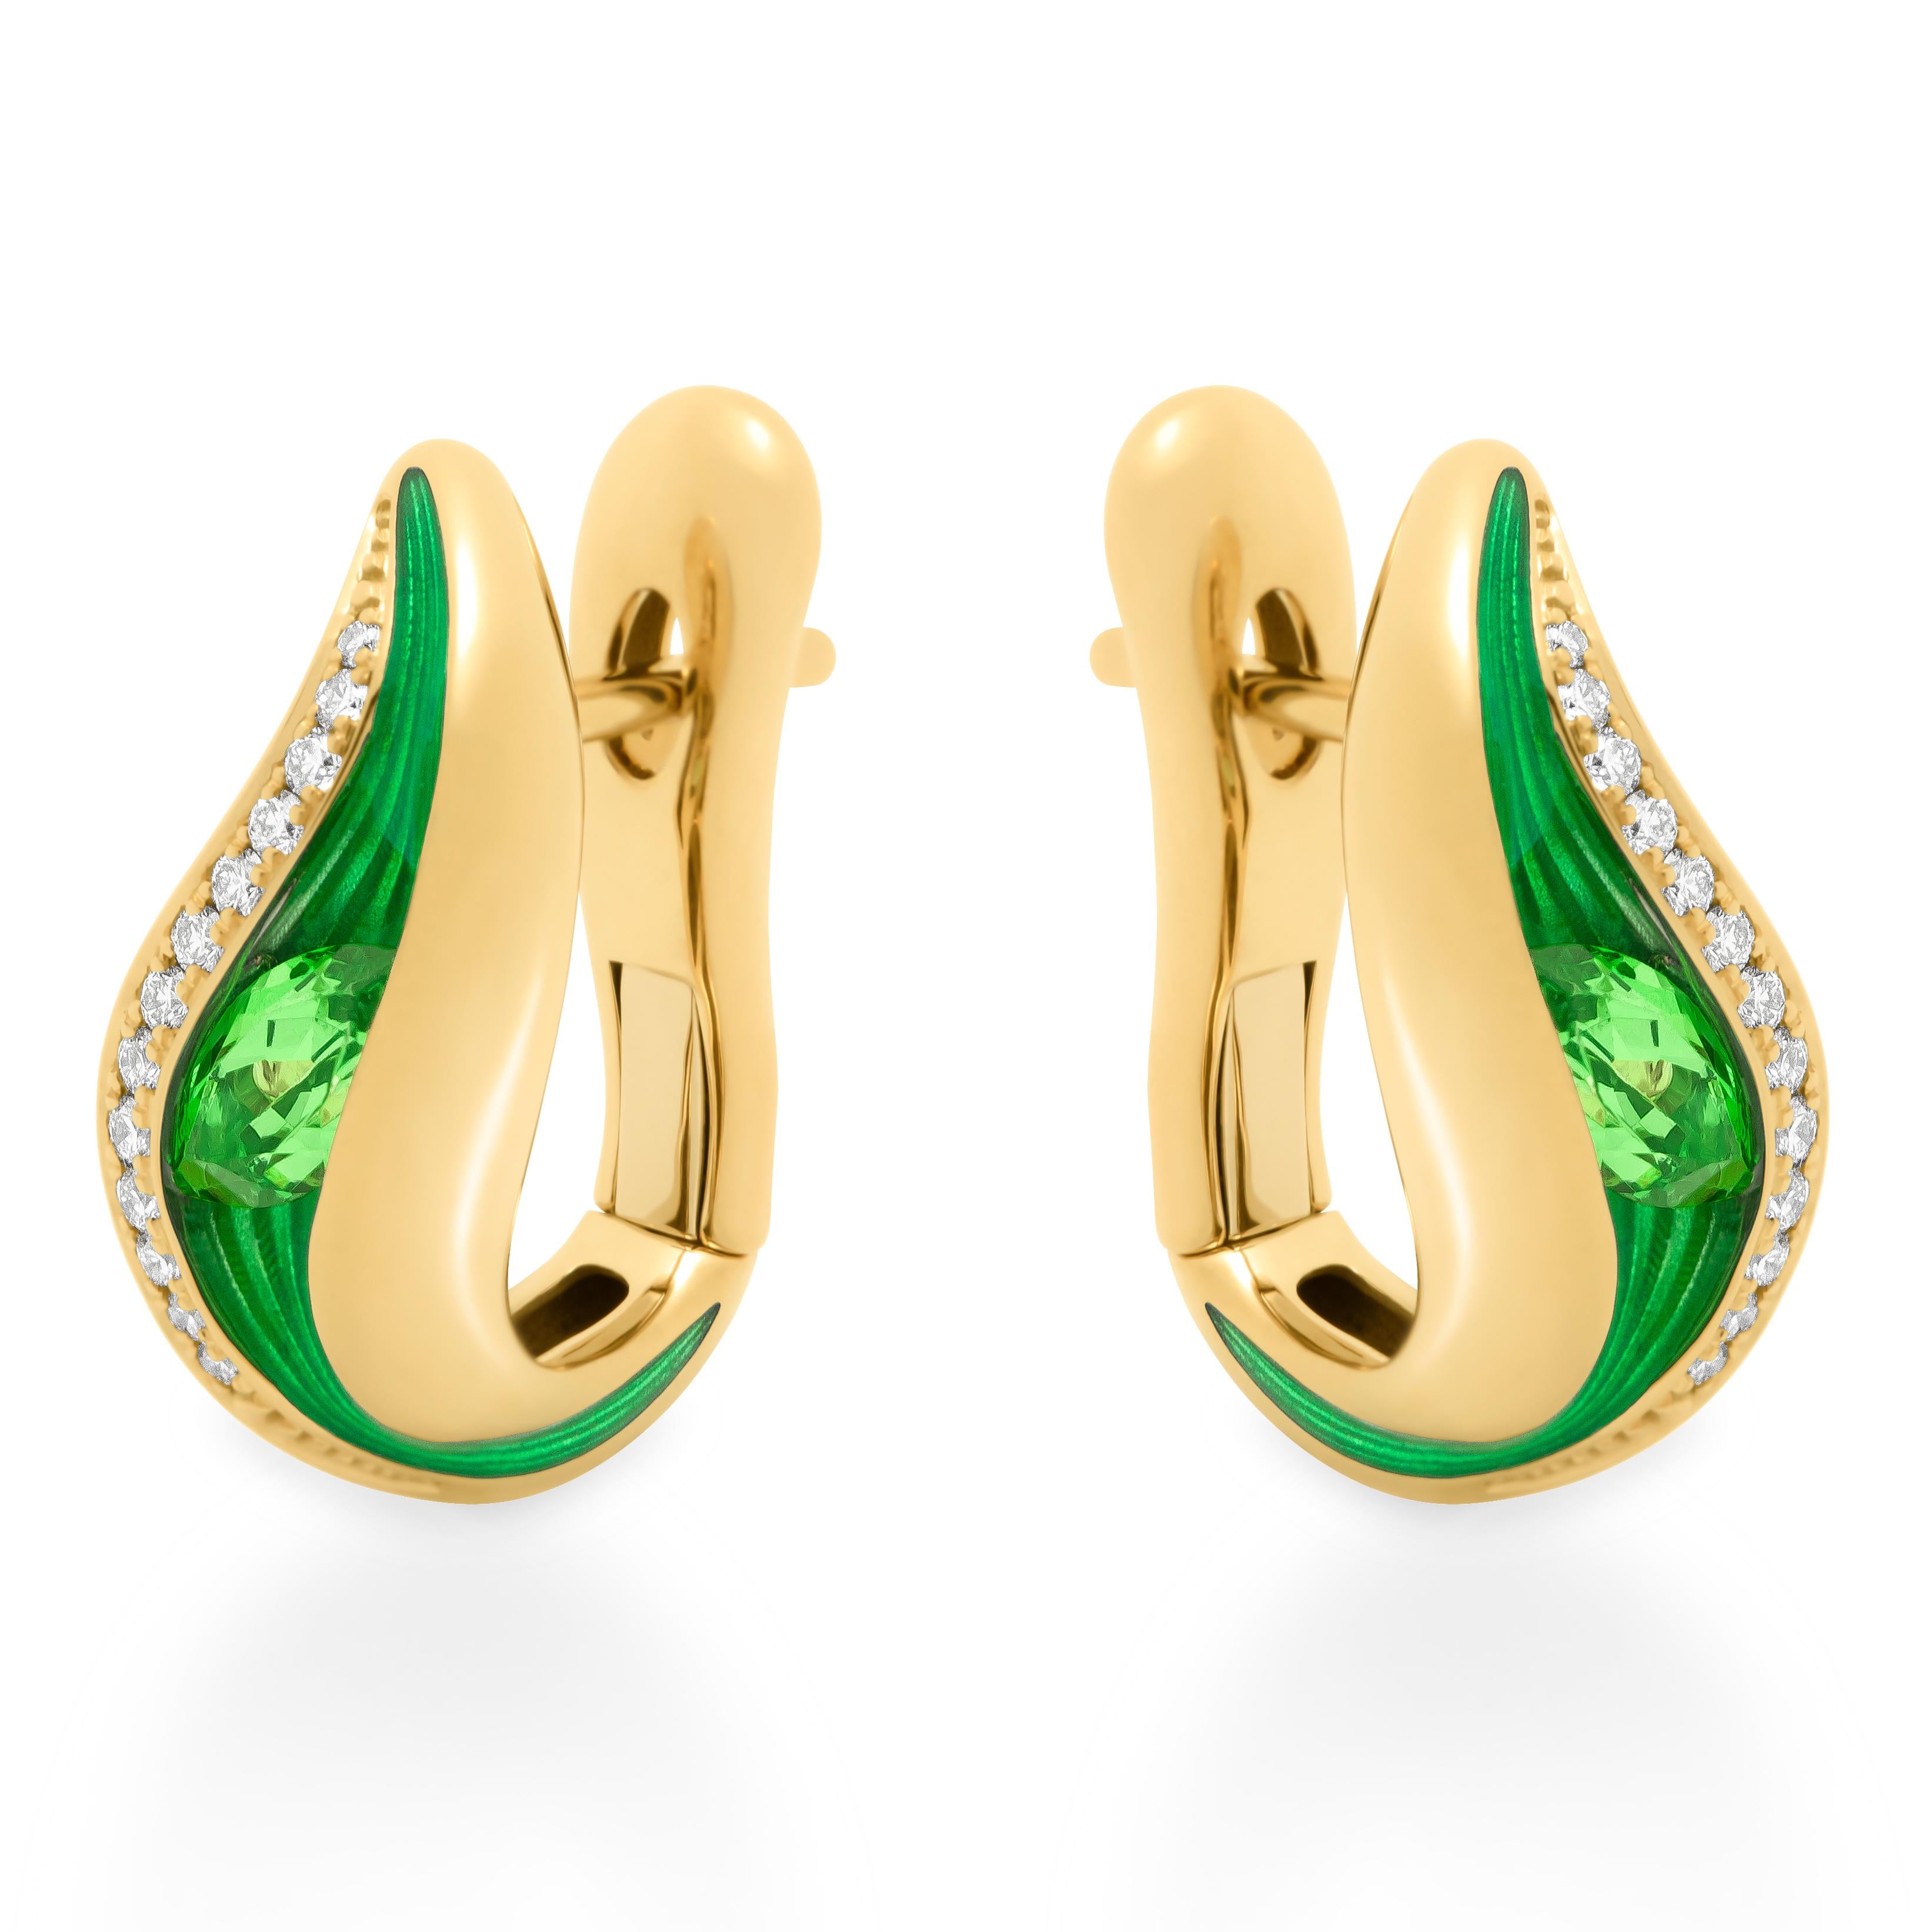 Tsavorite 0.56 Carat Diamonds Enamel 18 Karat Yellow Gold Melted Colors Earrings
Our new collection 